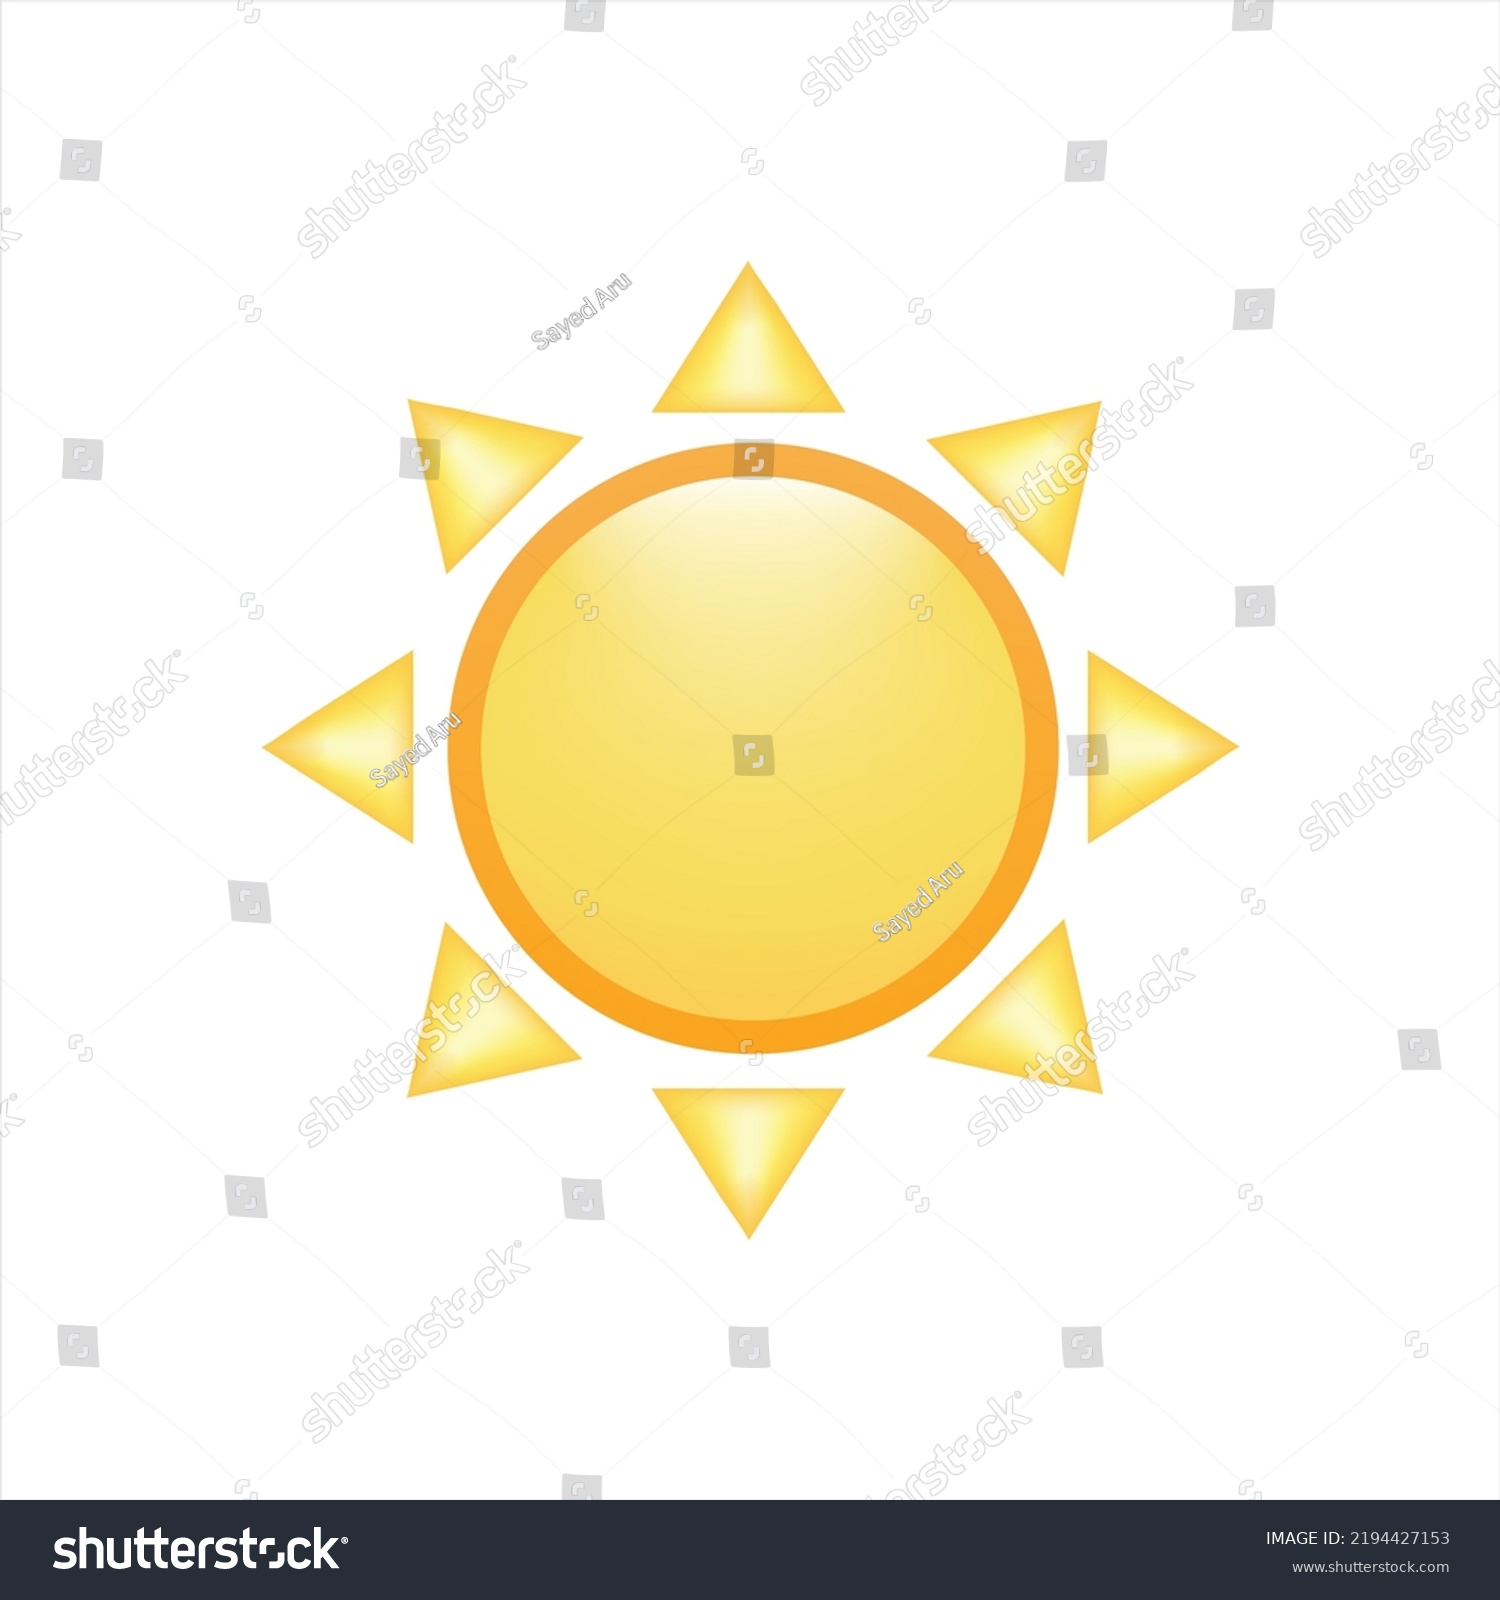 SVG of high quality Sun Sunshine Cloud icon logo symbol sign isolated 3d vector background chat comment weather climate vector illustration meteorology reactions template emoji character message svg